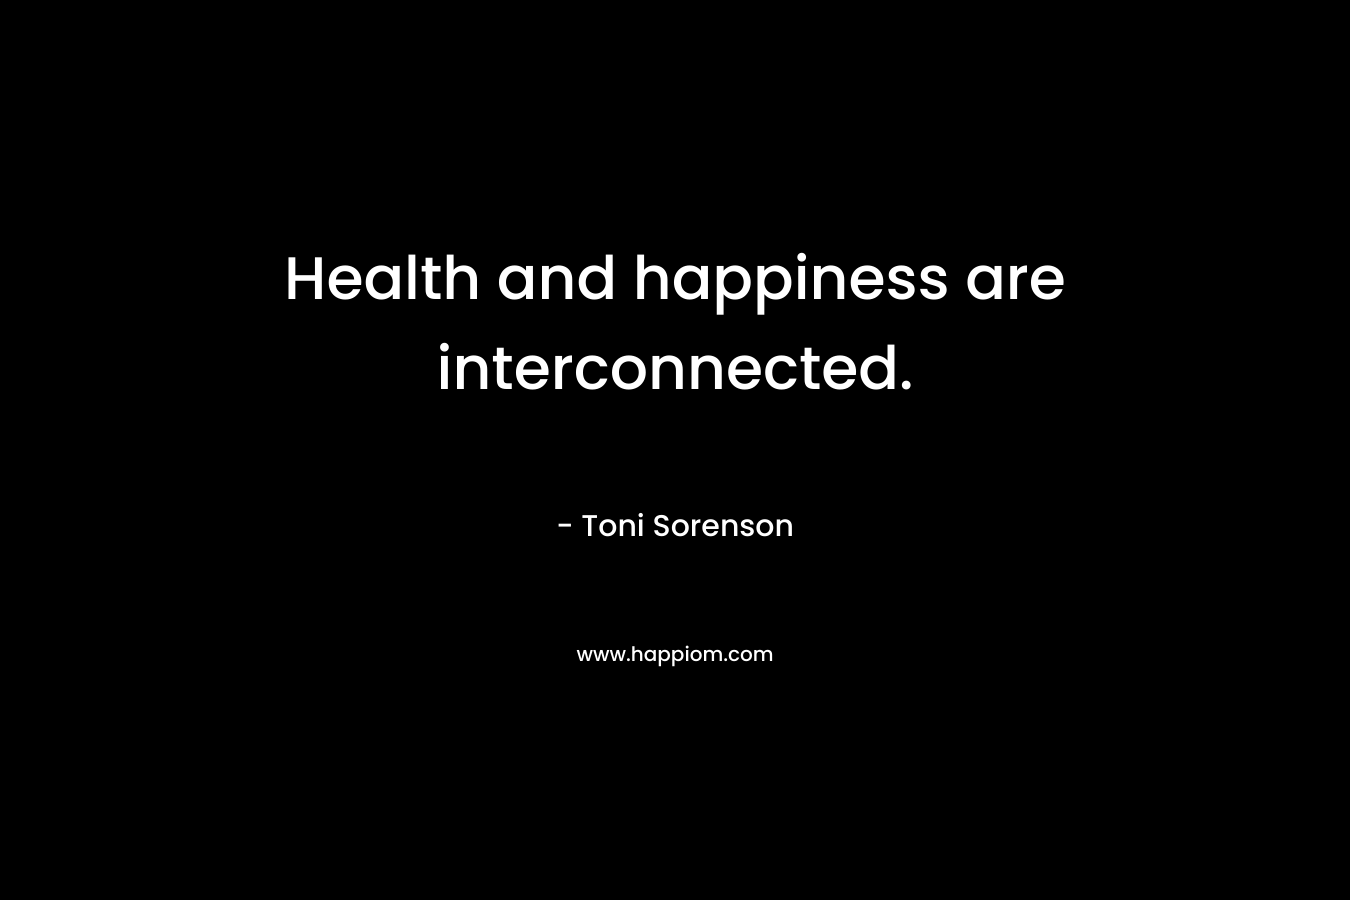 Health and happiness are interconnected.